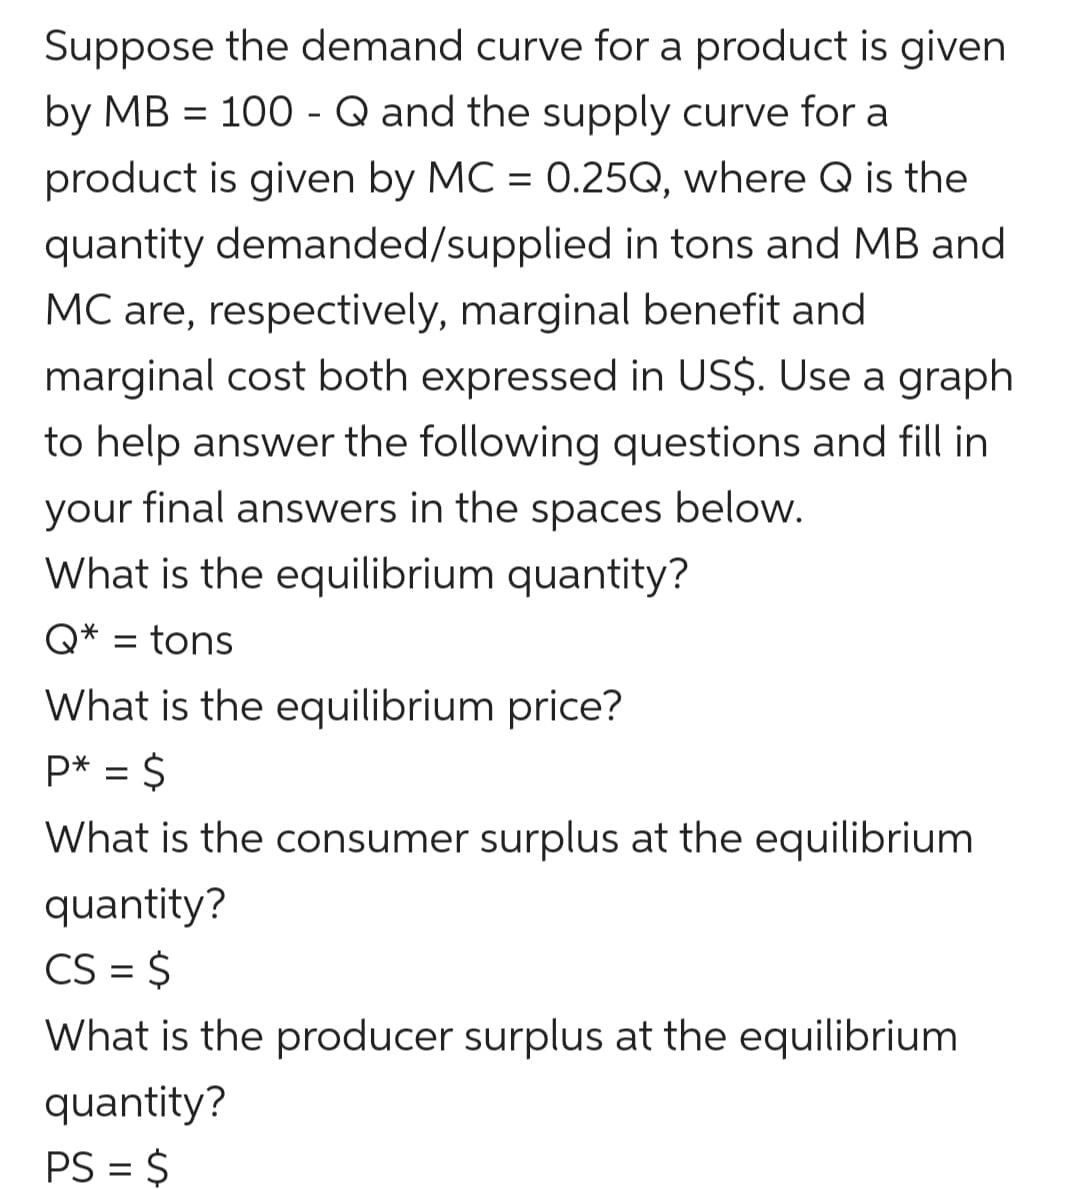 Suppose the demand curve for a product is given
by MB = 100 - Q and the supply curve for a
product is given by MC = 0.25Q, where Q is the
quantity demanded/supplied in tons and MB and
MC are, respectively, marginal benefit and
marginal cost both expressed in US$. Use a graph
to help answer the following questions and fill in
your final answers in the spaces below.
What is the equilibrium quantity?
Q* = tons
What is the equilibrium price?
P* = $
What is the consumer surplus at the equilibrium
quantity?
CS = $
What is the producer surplus at the equilibrium
quantity?
PS = $
